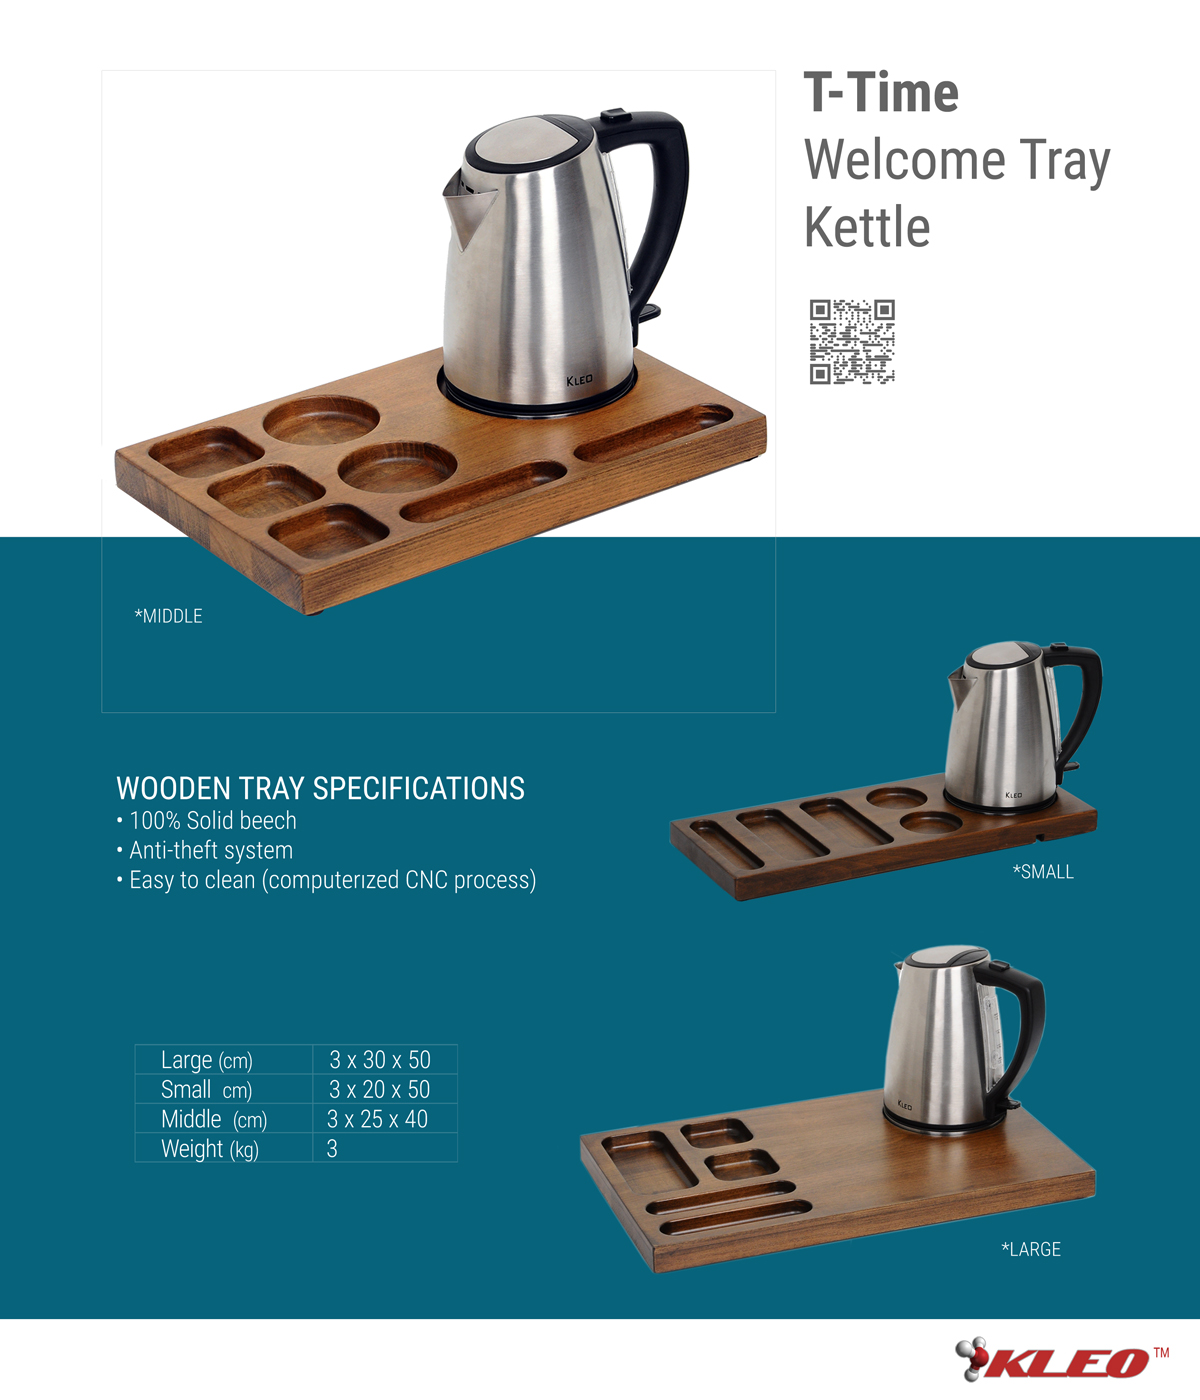 T-TIME WELCOME TRAY